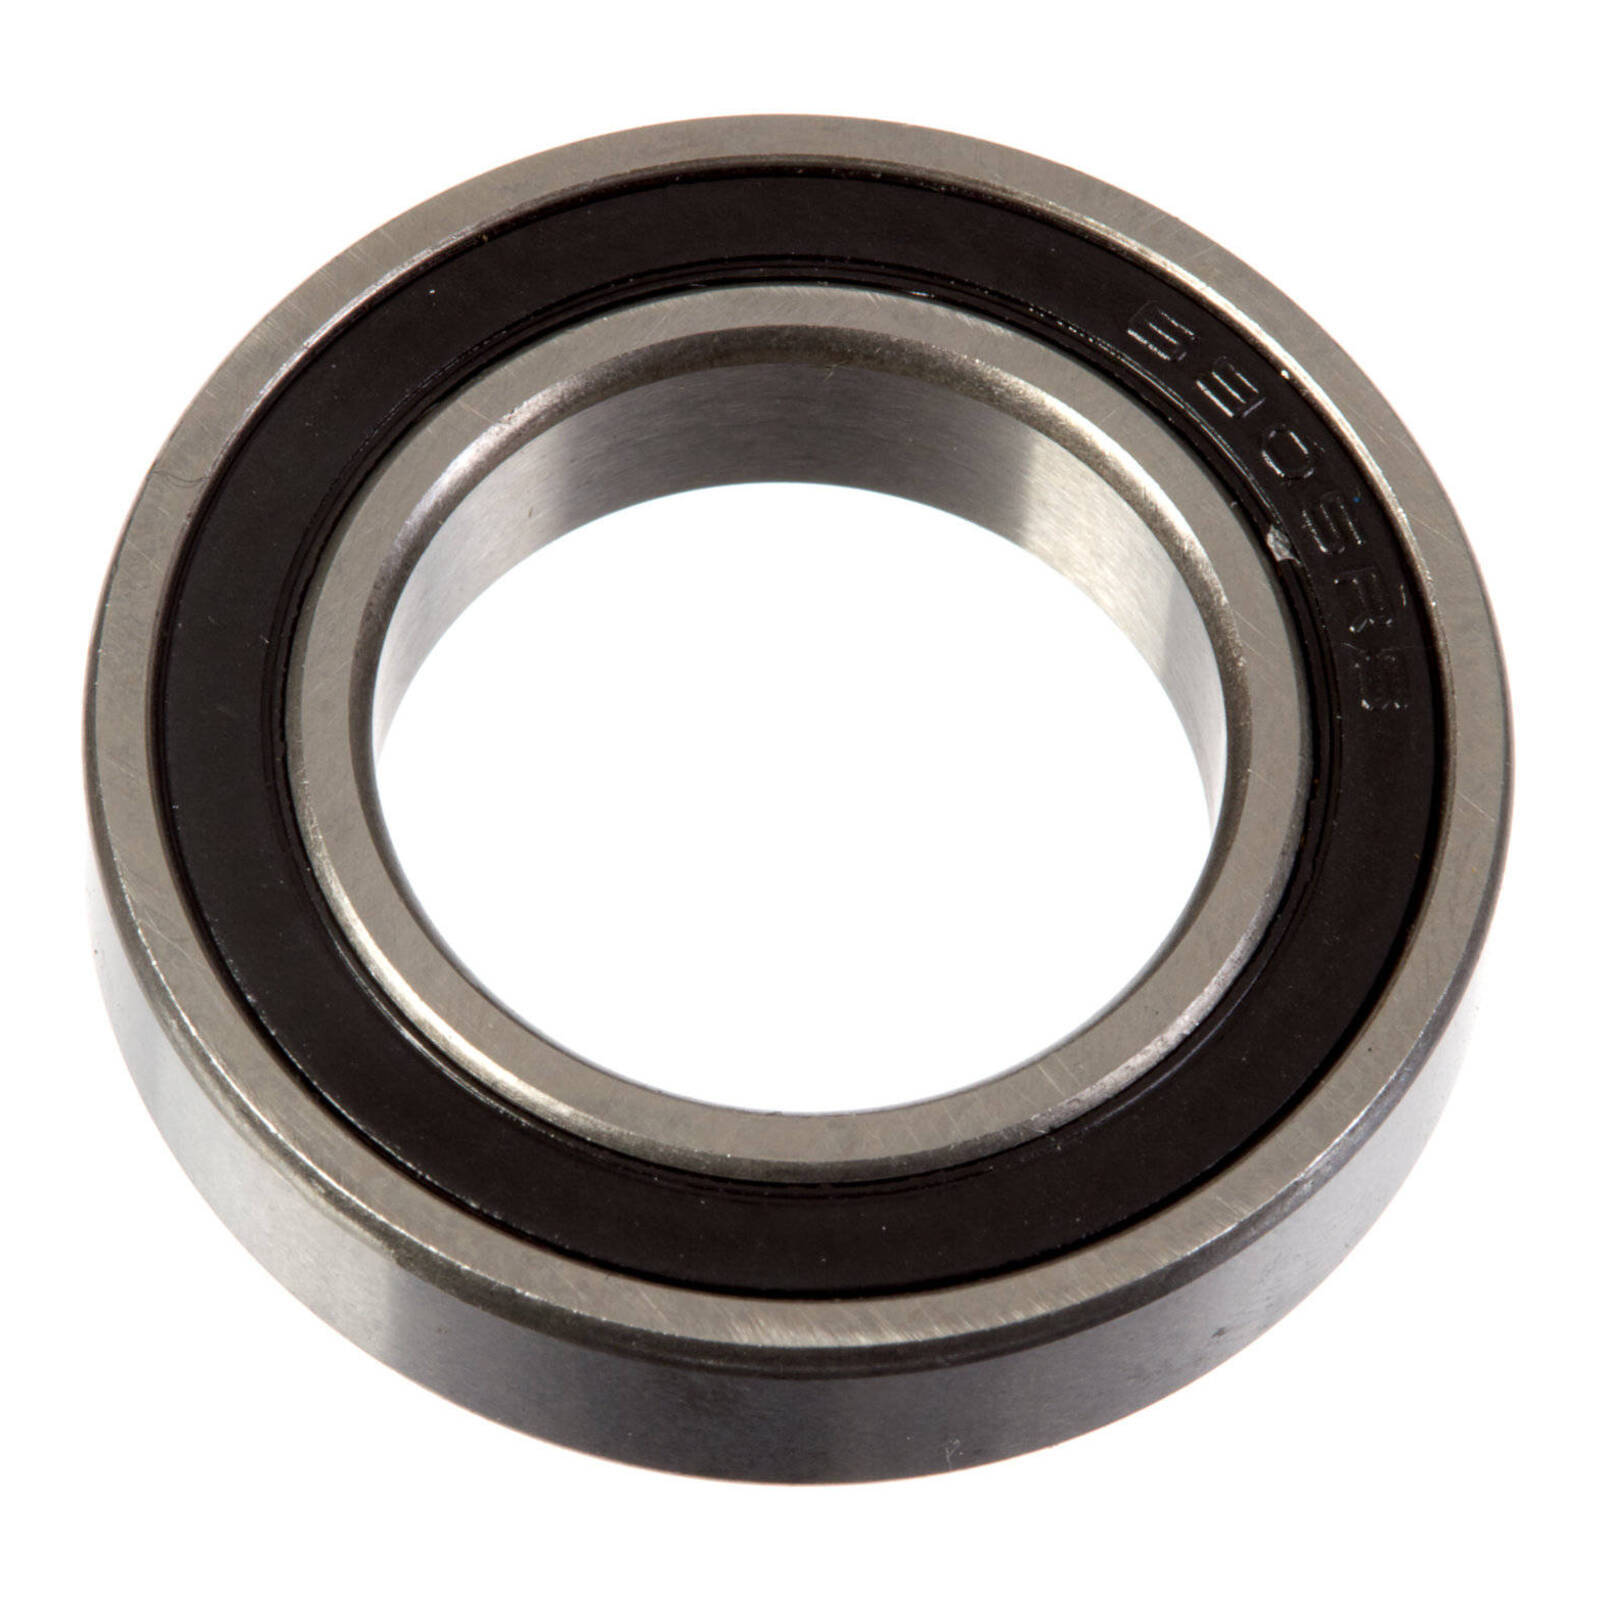 BEARING 6905 -2RS 1 PCE/EACH